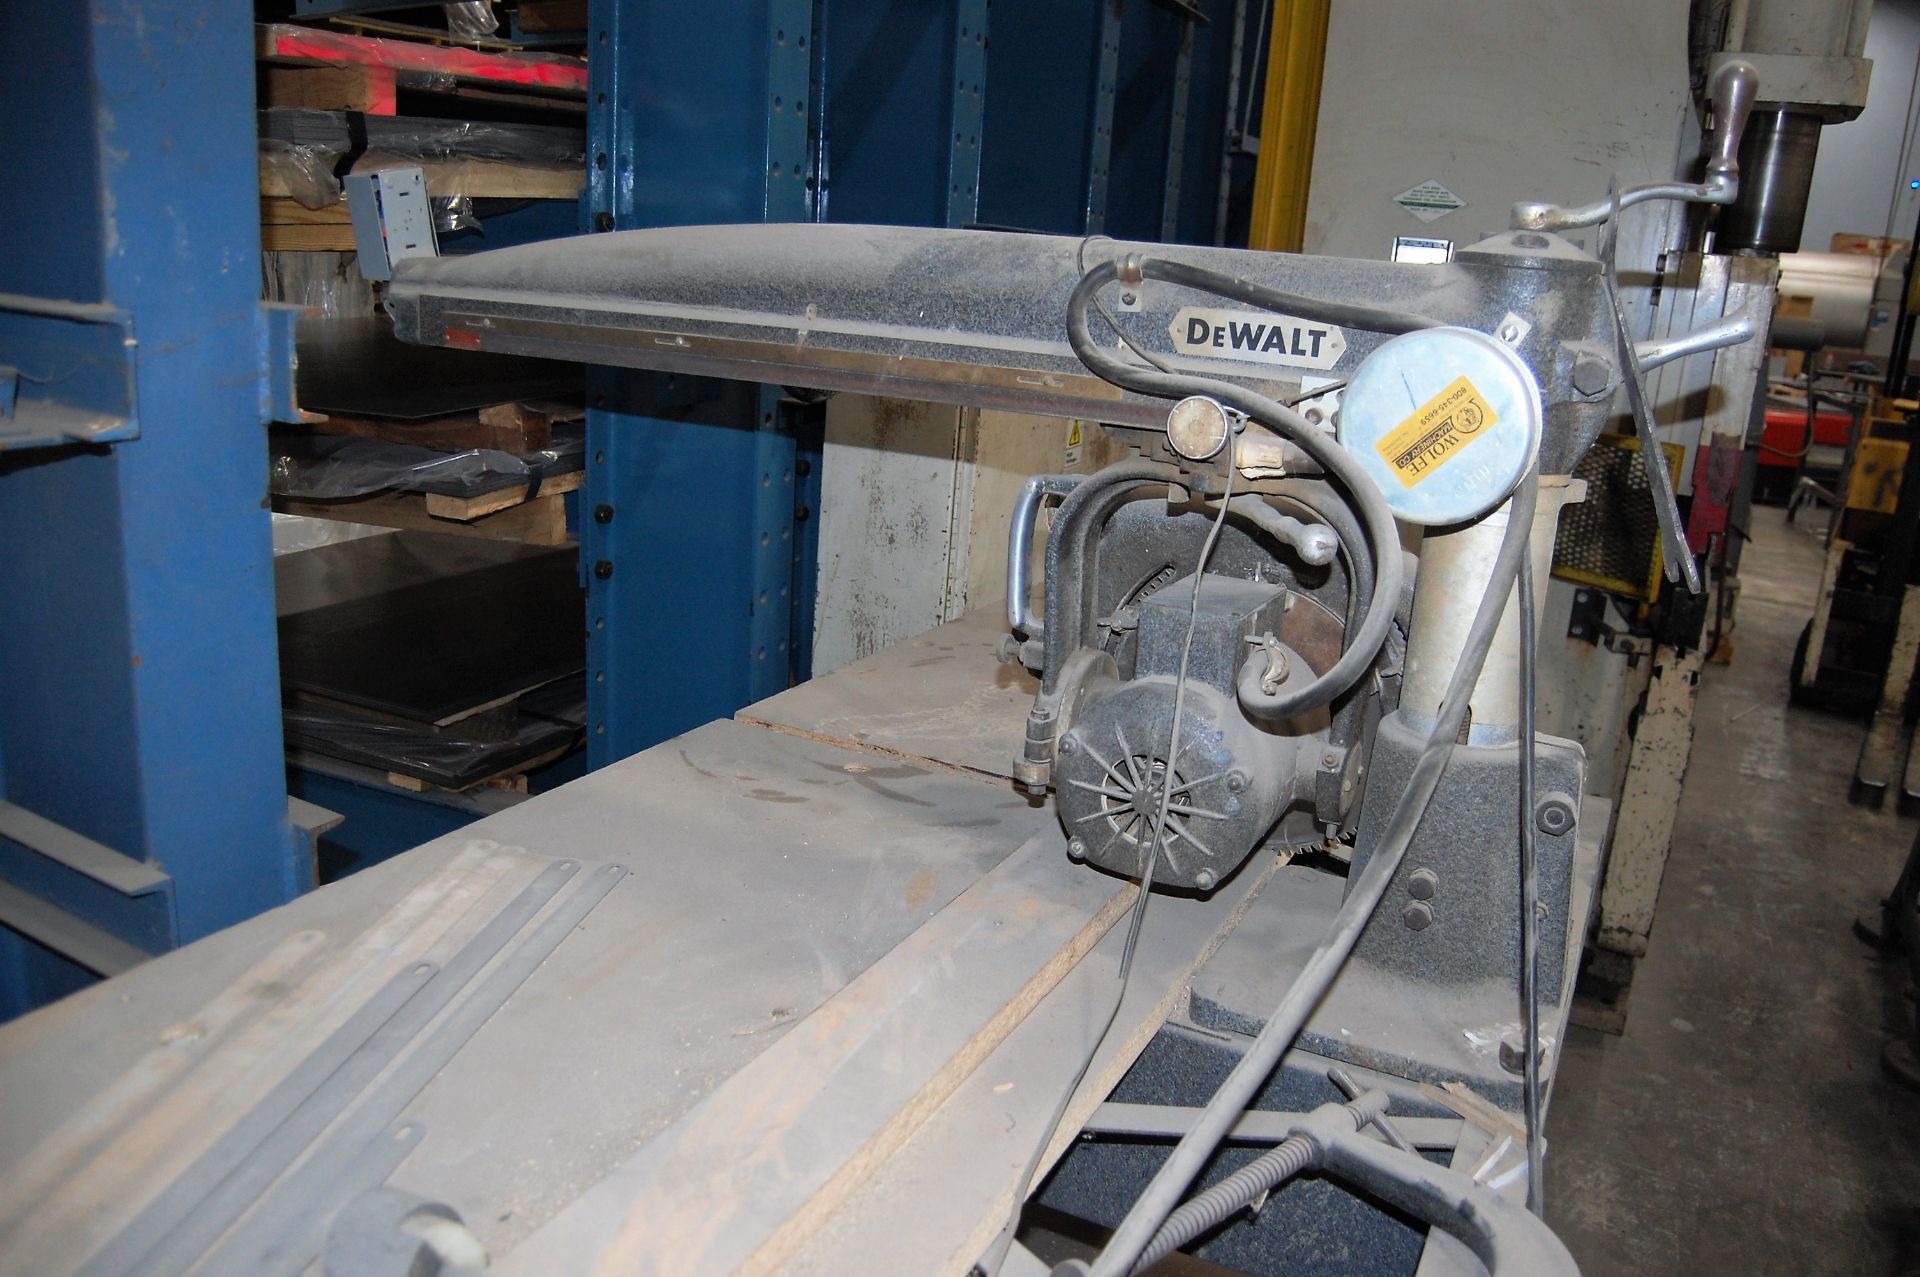 DeWALT MDL. GA 3HP 26" RIP SAW, S/N: 53933 [LOCATED IN MELVILLE, NY] - Image 3 of 6